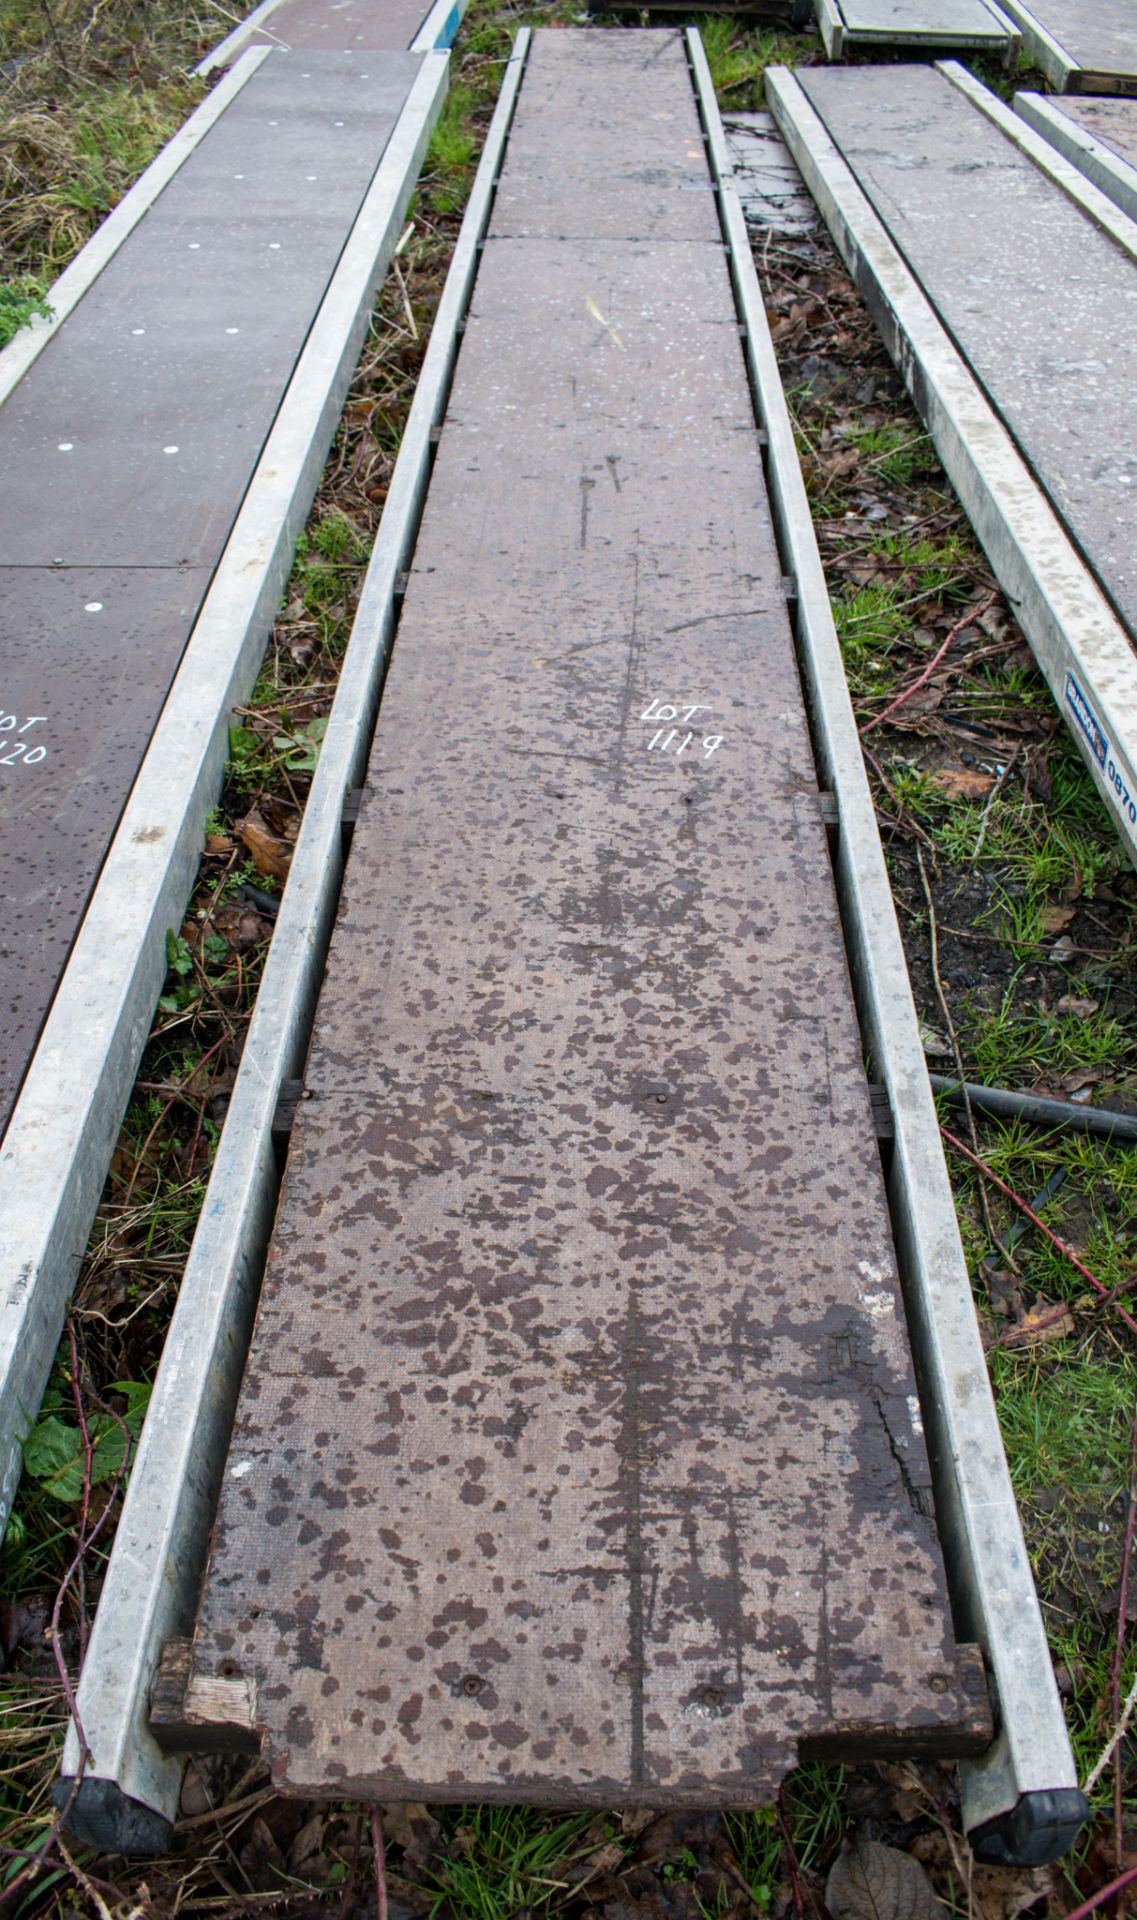 Aluminium staging board approximately 14 ft long